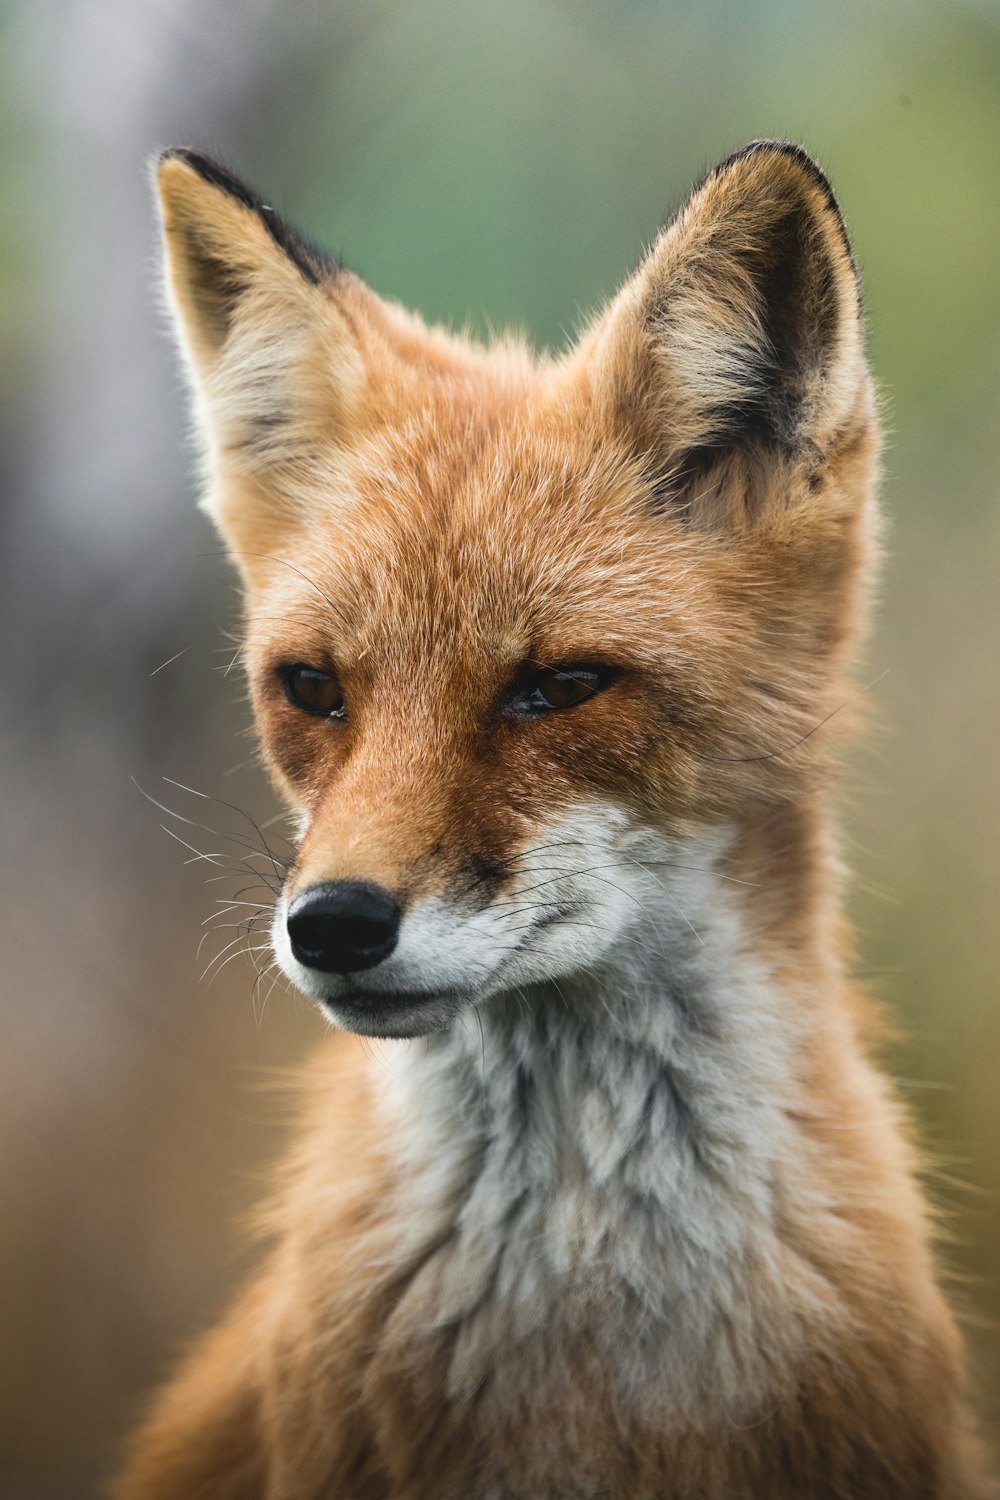 a close up of a fox's face with a blurry background